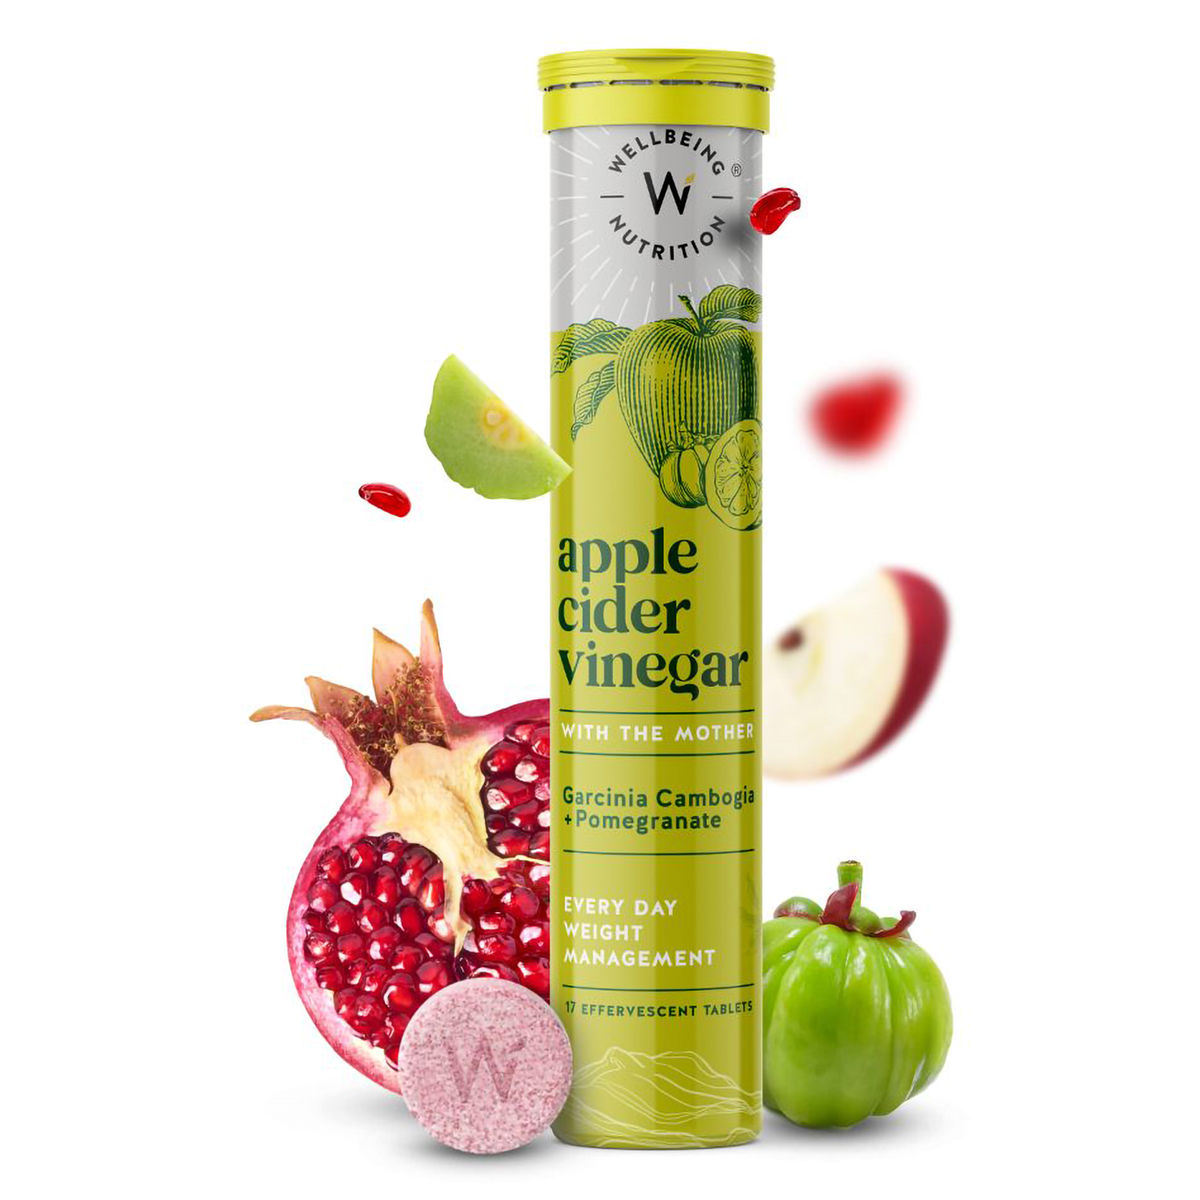 Buy Wellbeing Nutrition Apple Cider Vinegar with The Mother, 17 Effervescent Tablets Online